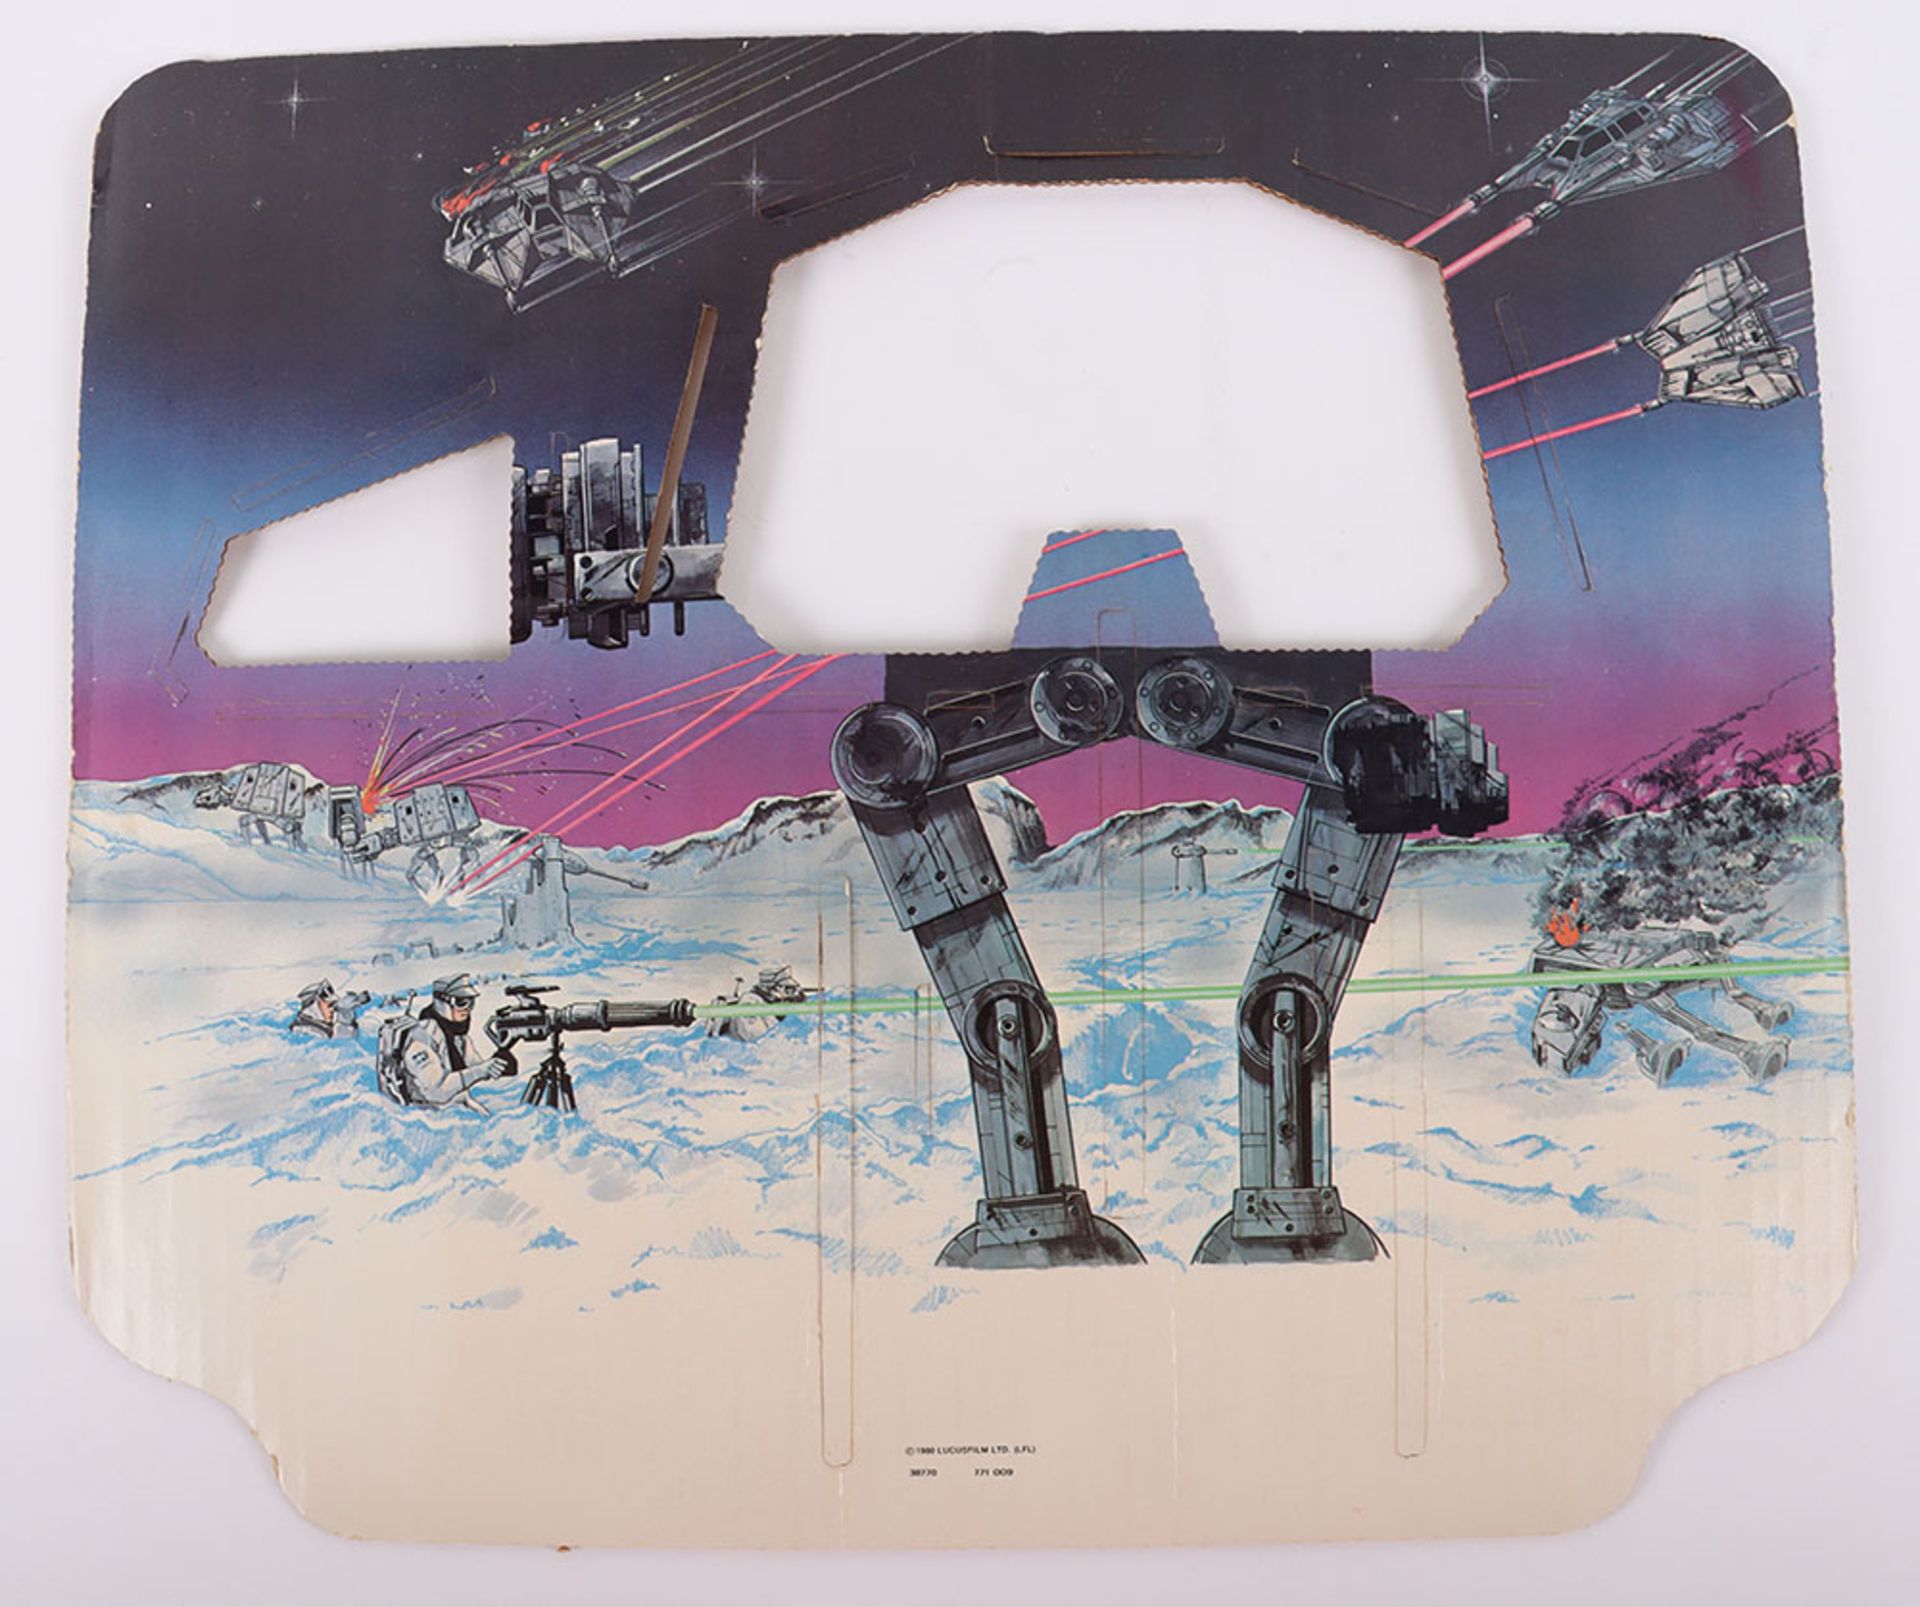 Boxed Vintage Kenner Star Wars The Empire Strikes Back Hoth Ice Planet Adventure Set - Image 2 of 16